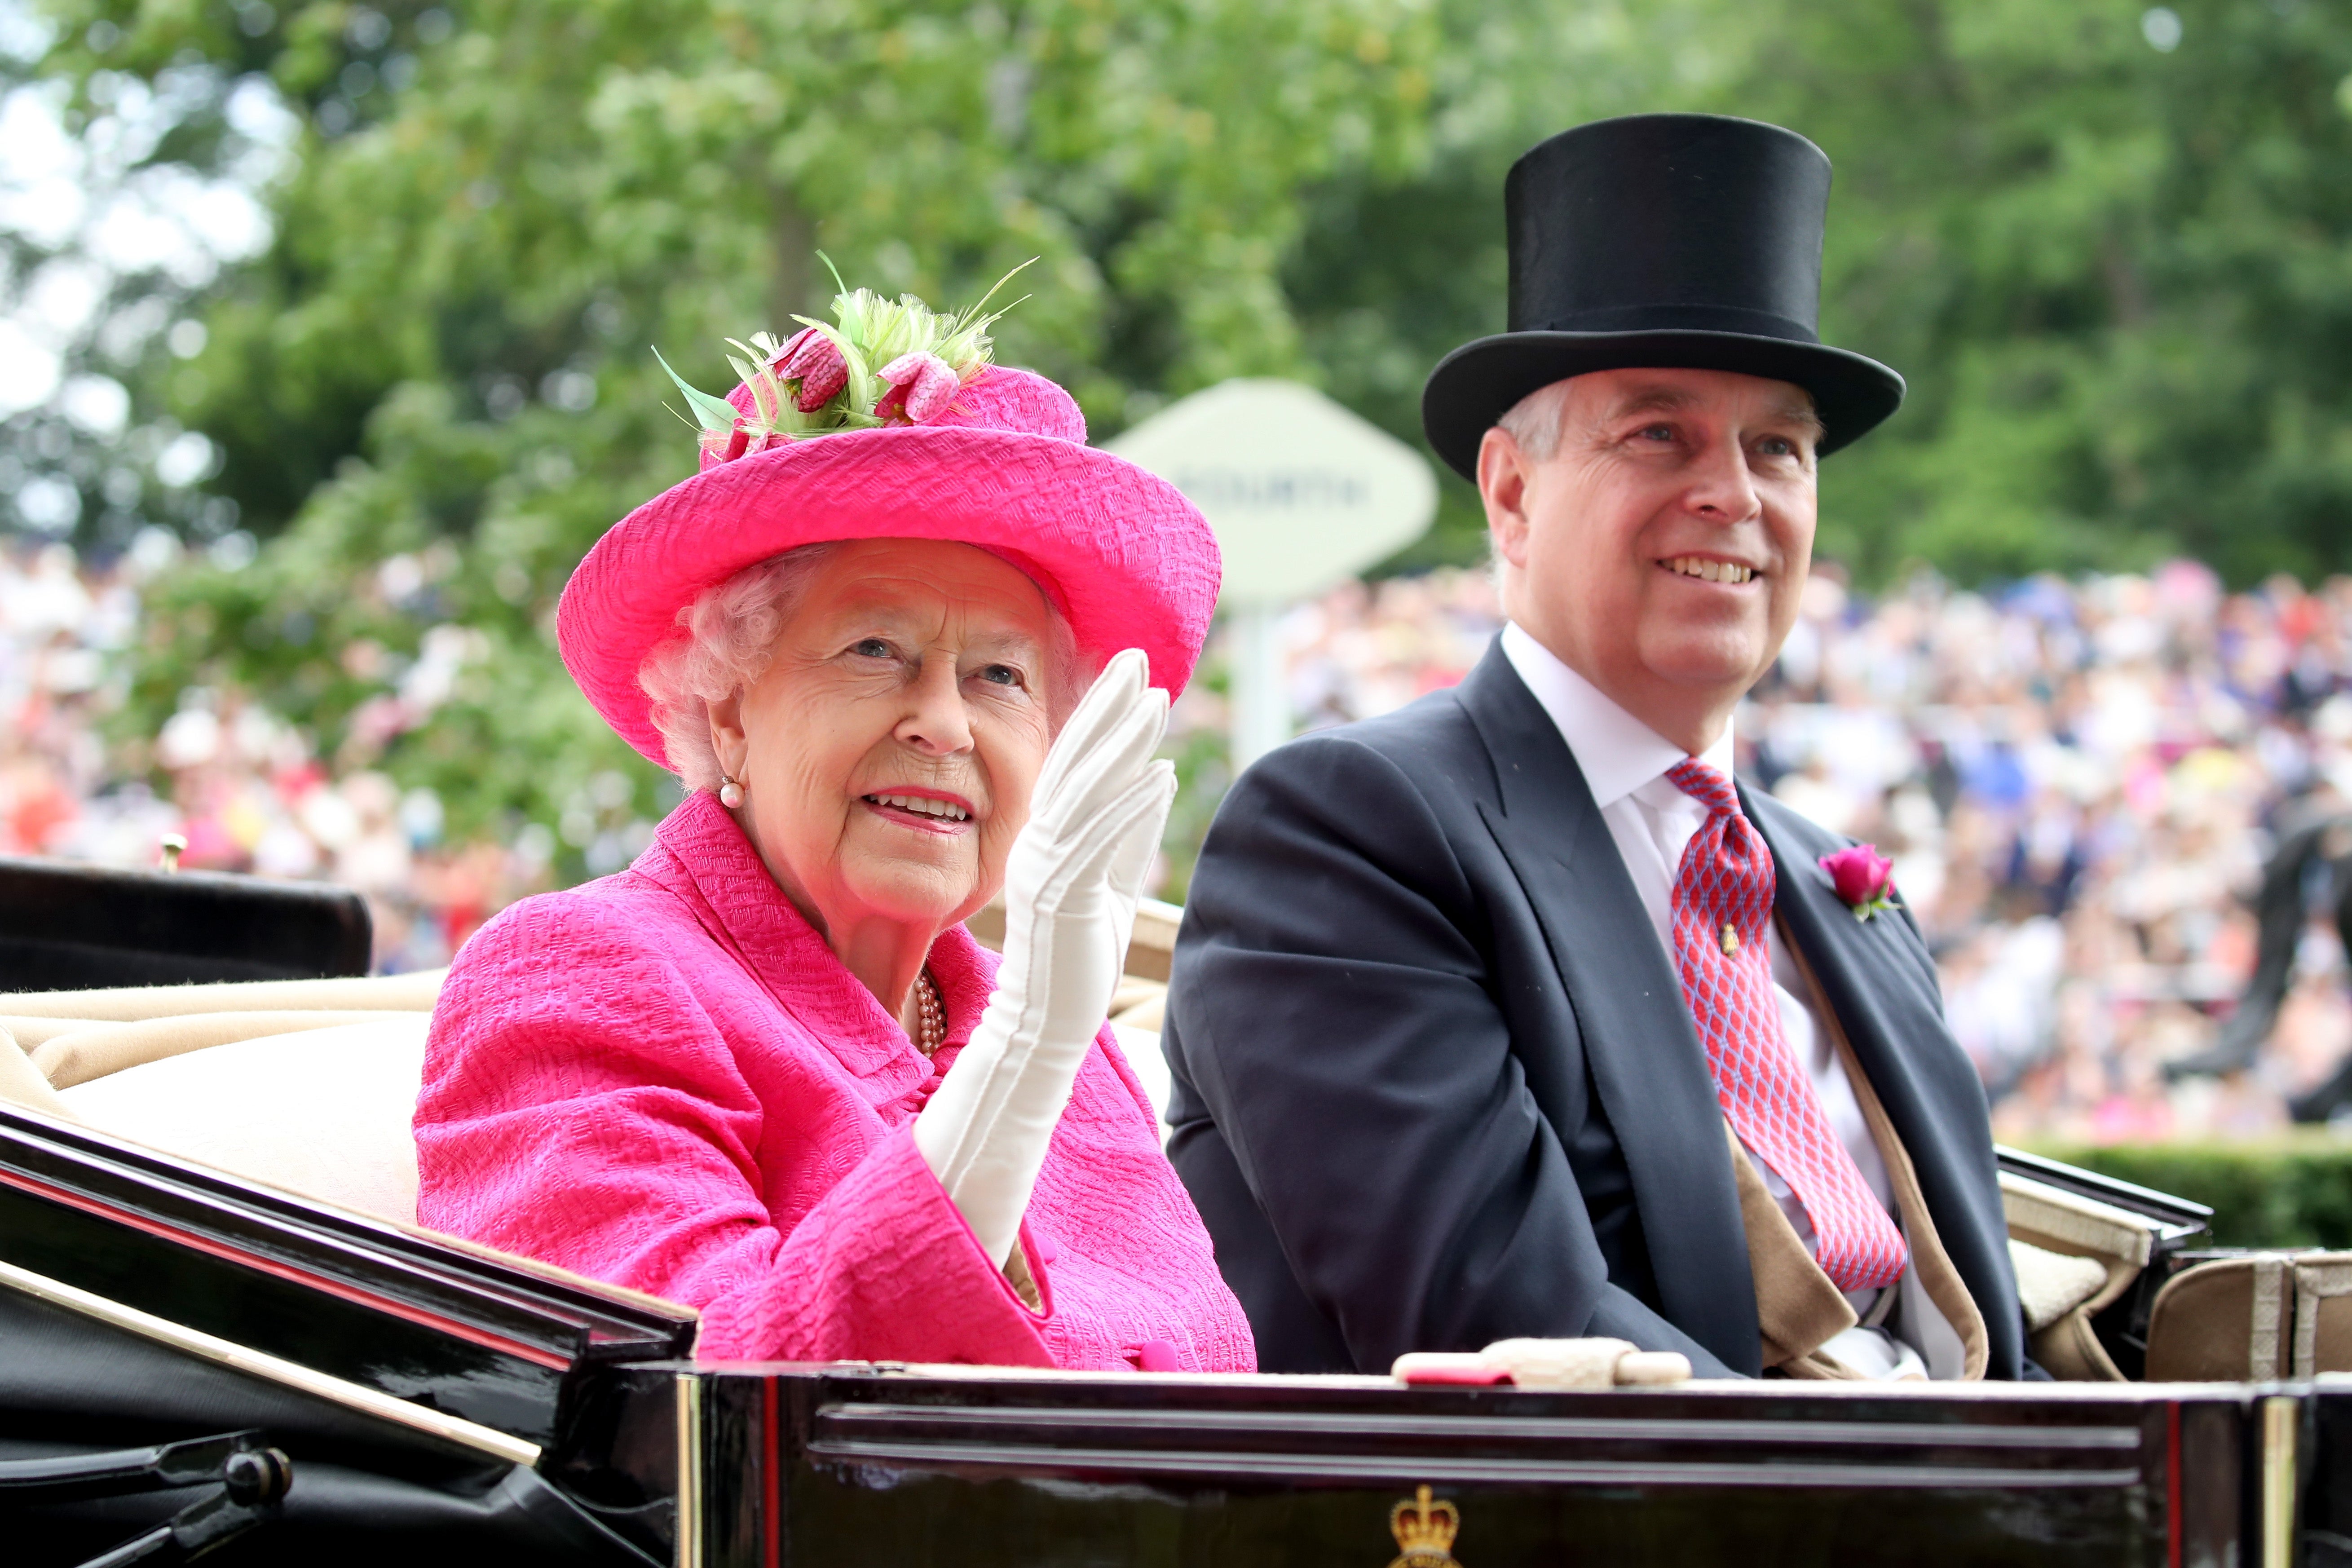 The Queen and Prince Andrew at Ascot in 2017